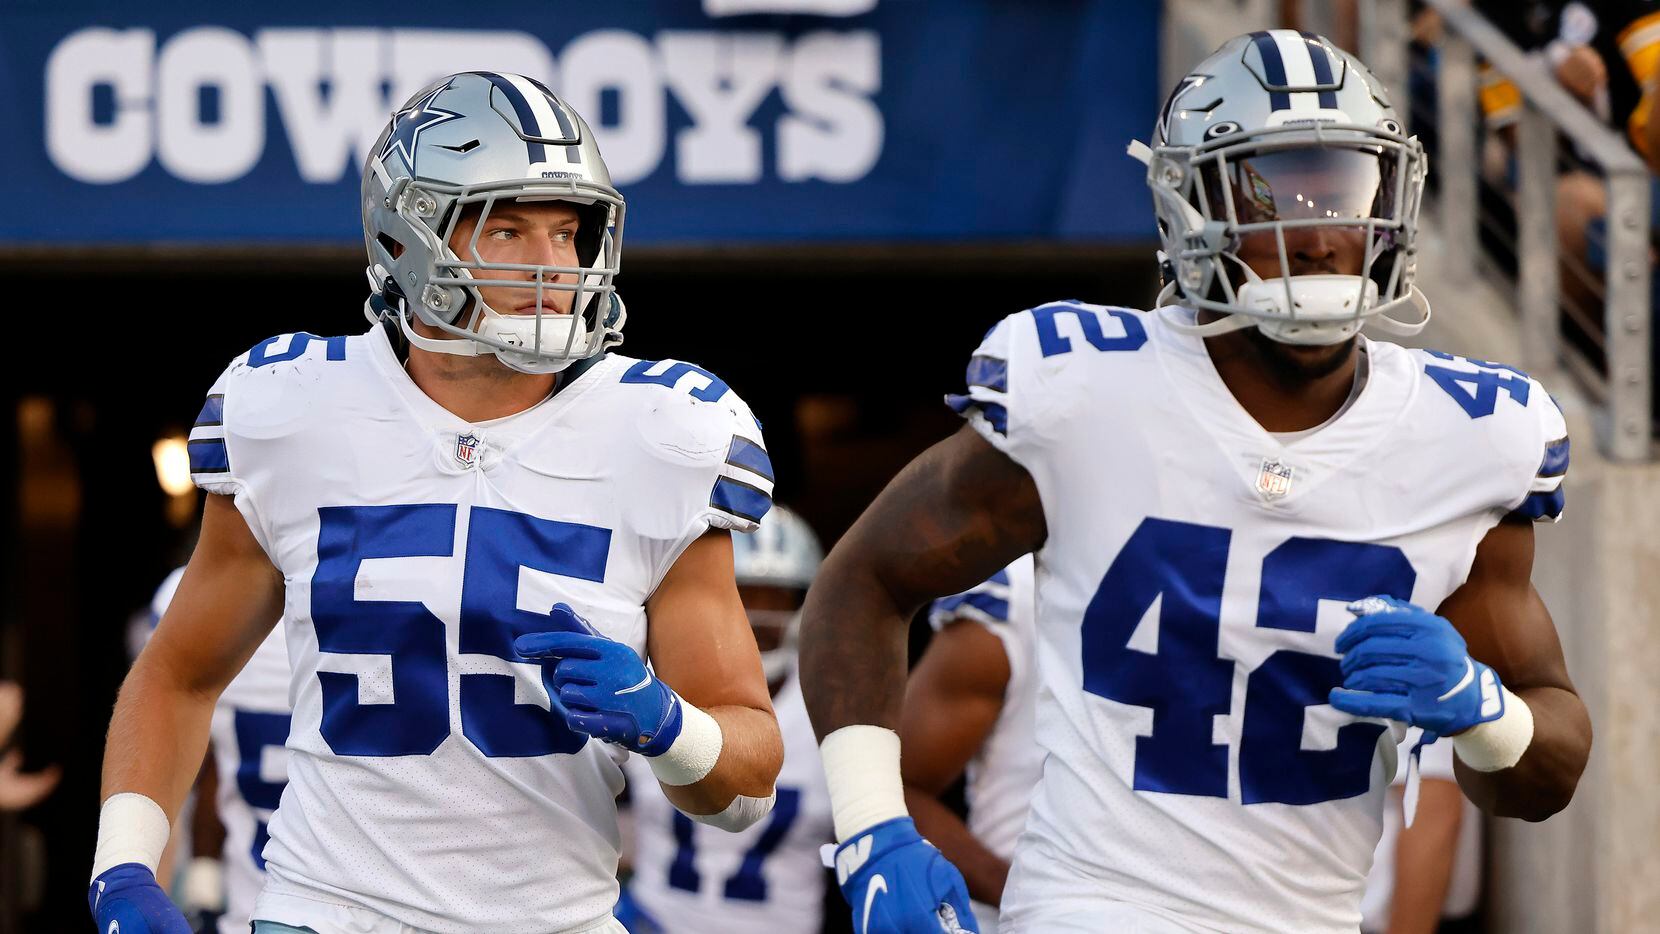 Dallas Cowboys linebackers Leighton Vander Esch (55) and Keanu Neal (42) take the field to face the Pittsburgh Steelers in their first preseason game at Tom Benson Hall of Fame Stadium in Canton, Ohio, Thursday, August 5, 2021.